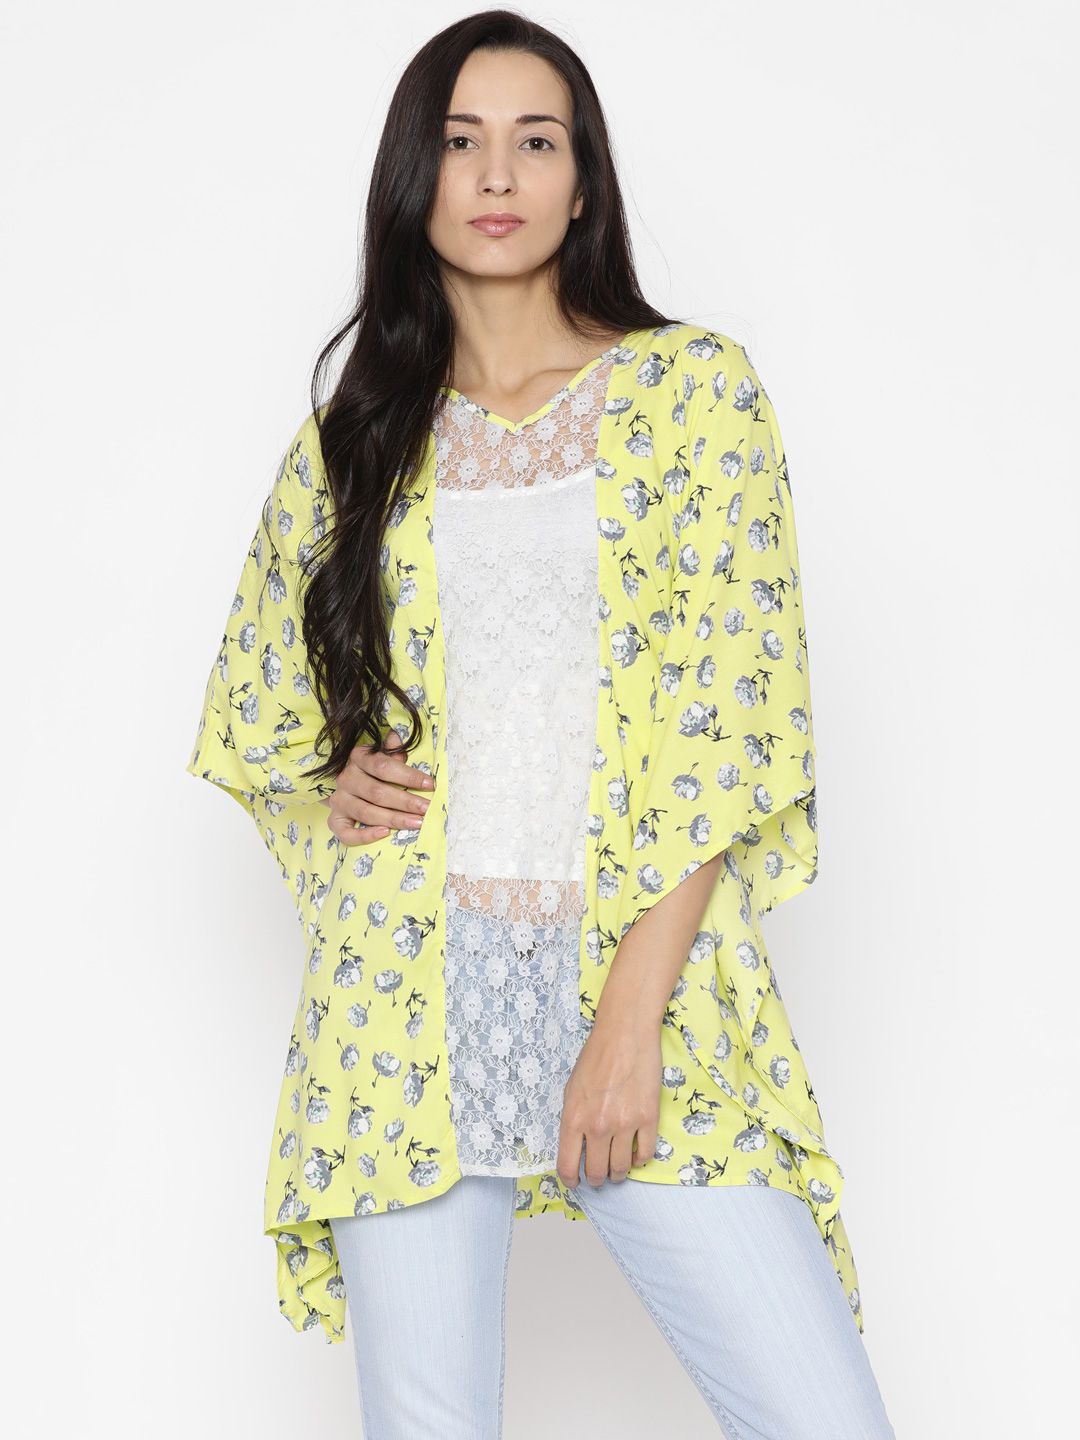 The Kaftan Company Yellow Floral Print Kaftan Cover-Up Dress RW_PARDS022 Price in India